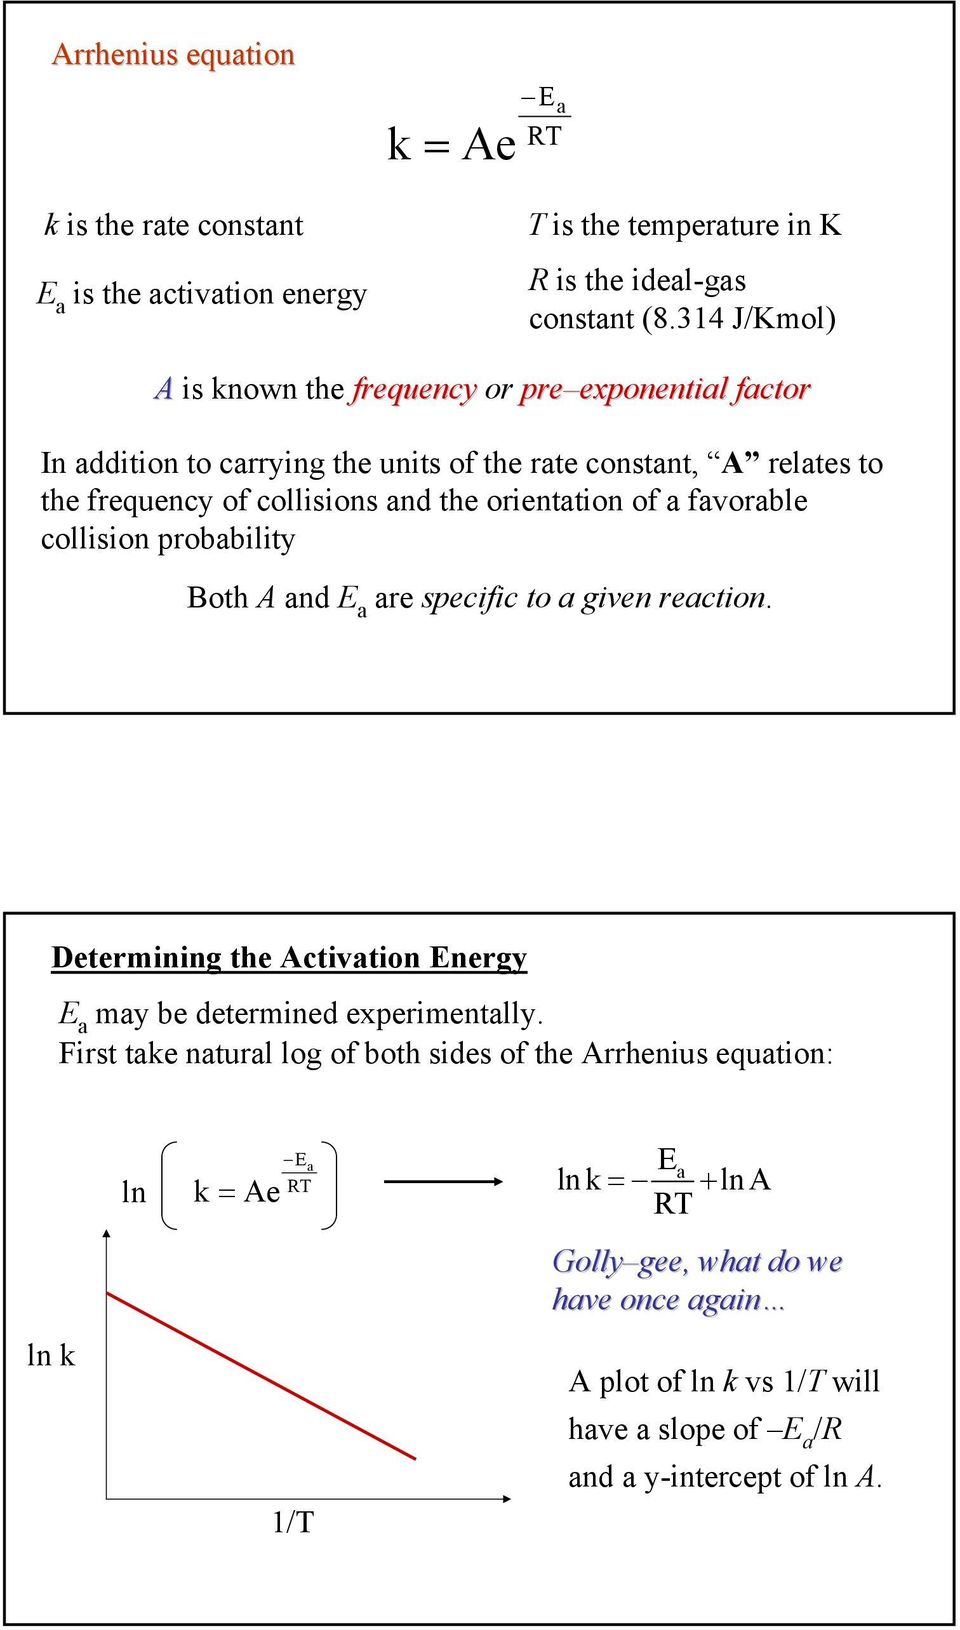 orientation of a favorable collision probability Both A and E a are specific to a given reaction. Determining the Activation Energy E a may be determined experimentally.